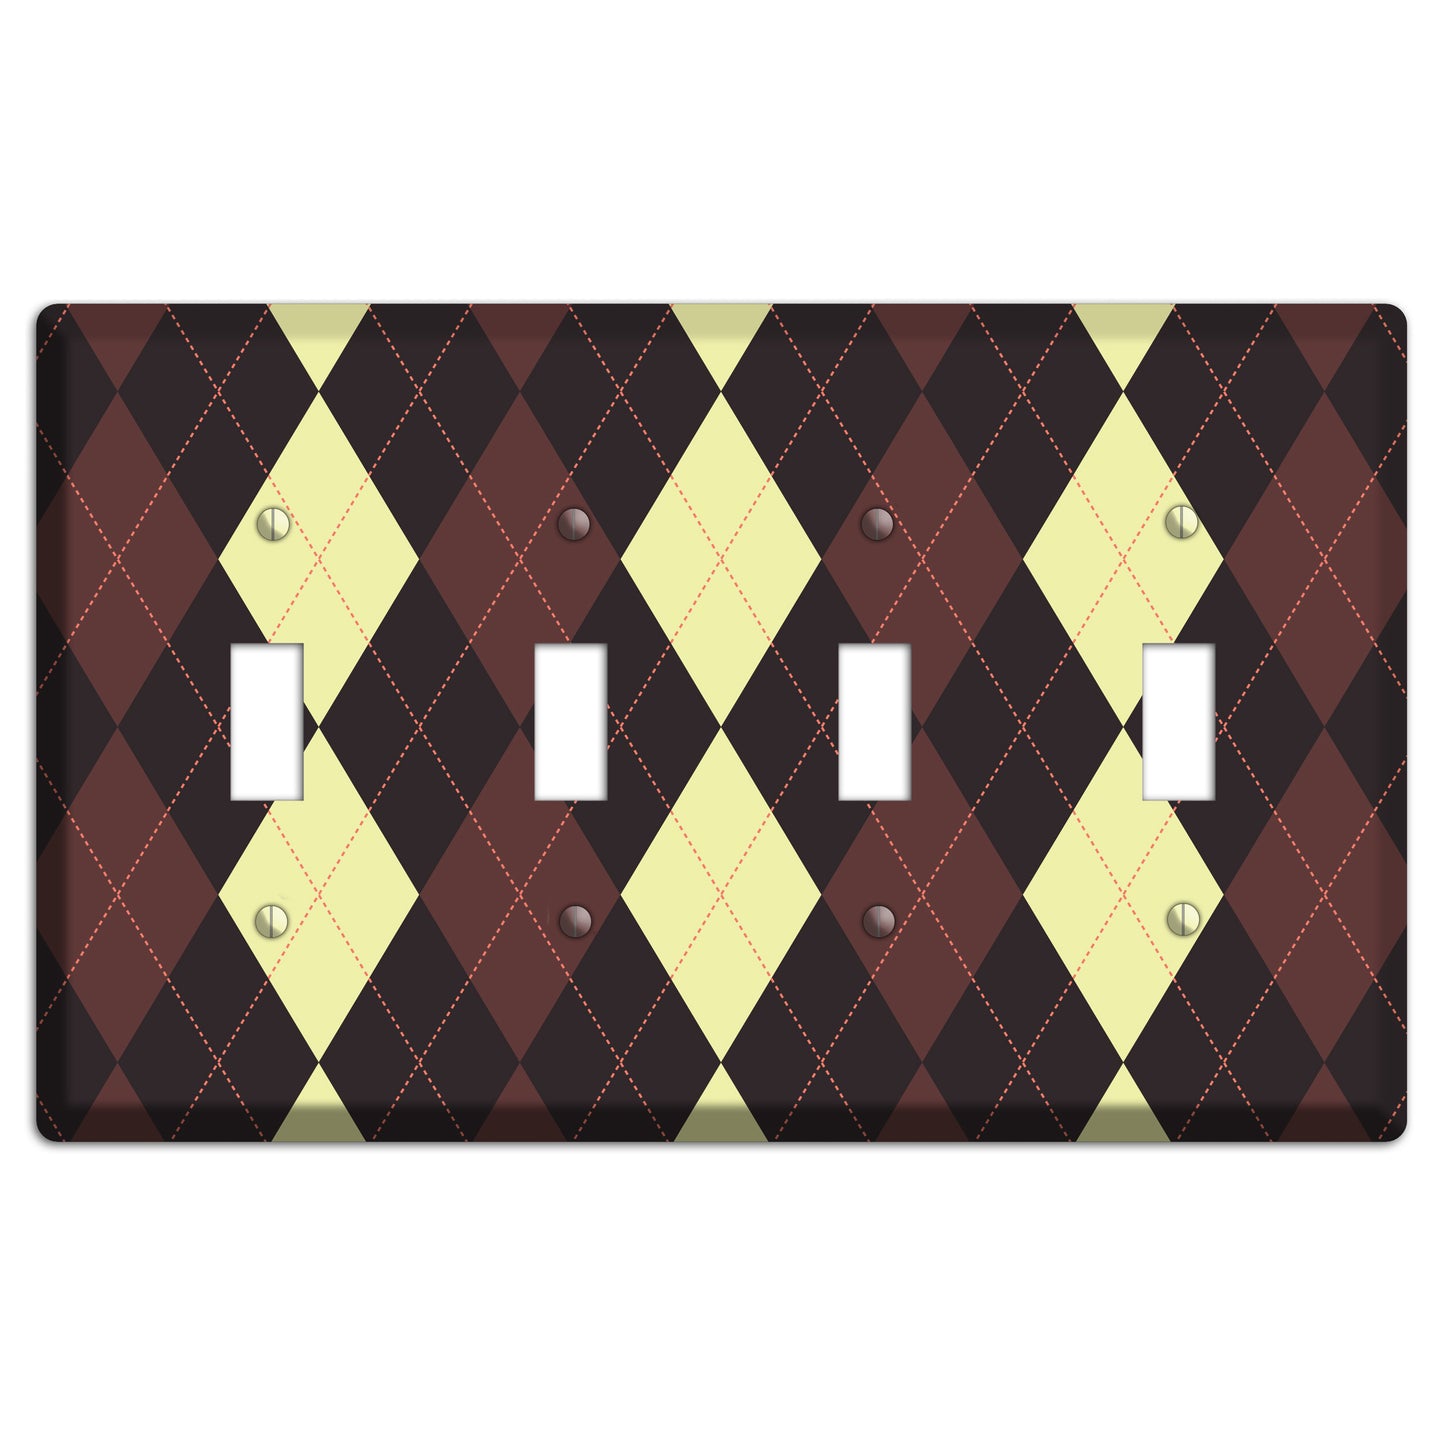 Maroon and Yellow Argyle 4 Toggle Wallplate